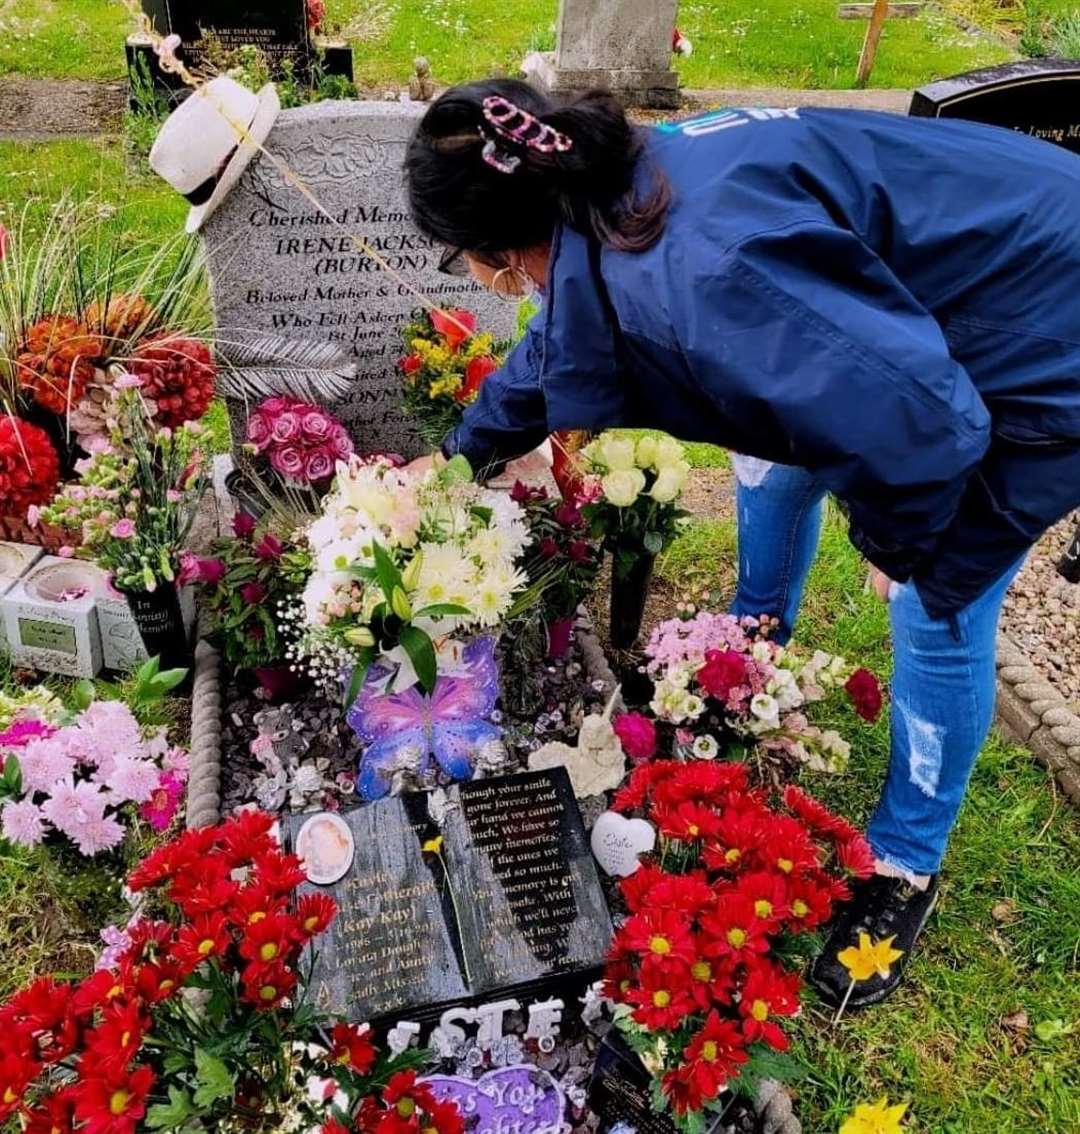 Naomi visited her daughter's grave earlier on the same day her purse was stolen